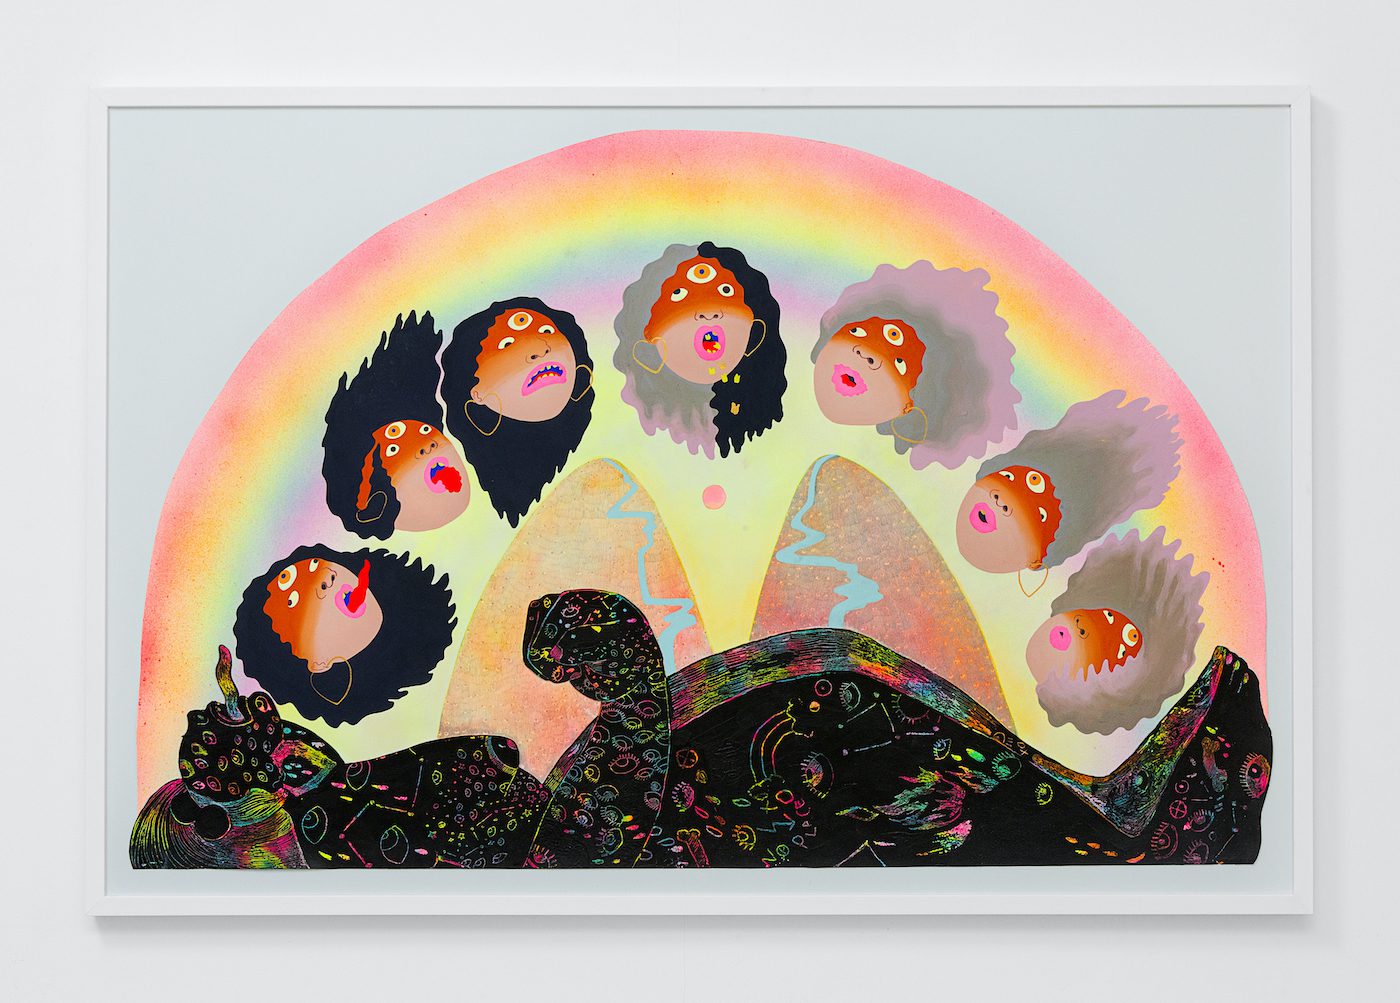 Amaryllis DeJesus Moleski, I was not a person, I was a place, 2020, gouache, watercolor, acrylic, cut paper, graphite, colored pencil, and airbrush on paper, sheet size 79.6 x 123.4 cm (31.3 x 48.5 inches), Courtesy the artist and Luce Gallery, Turin, Photo Andrea Ferrari